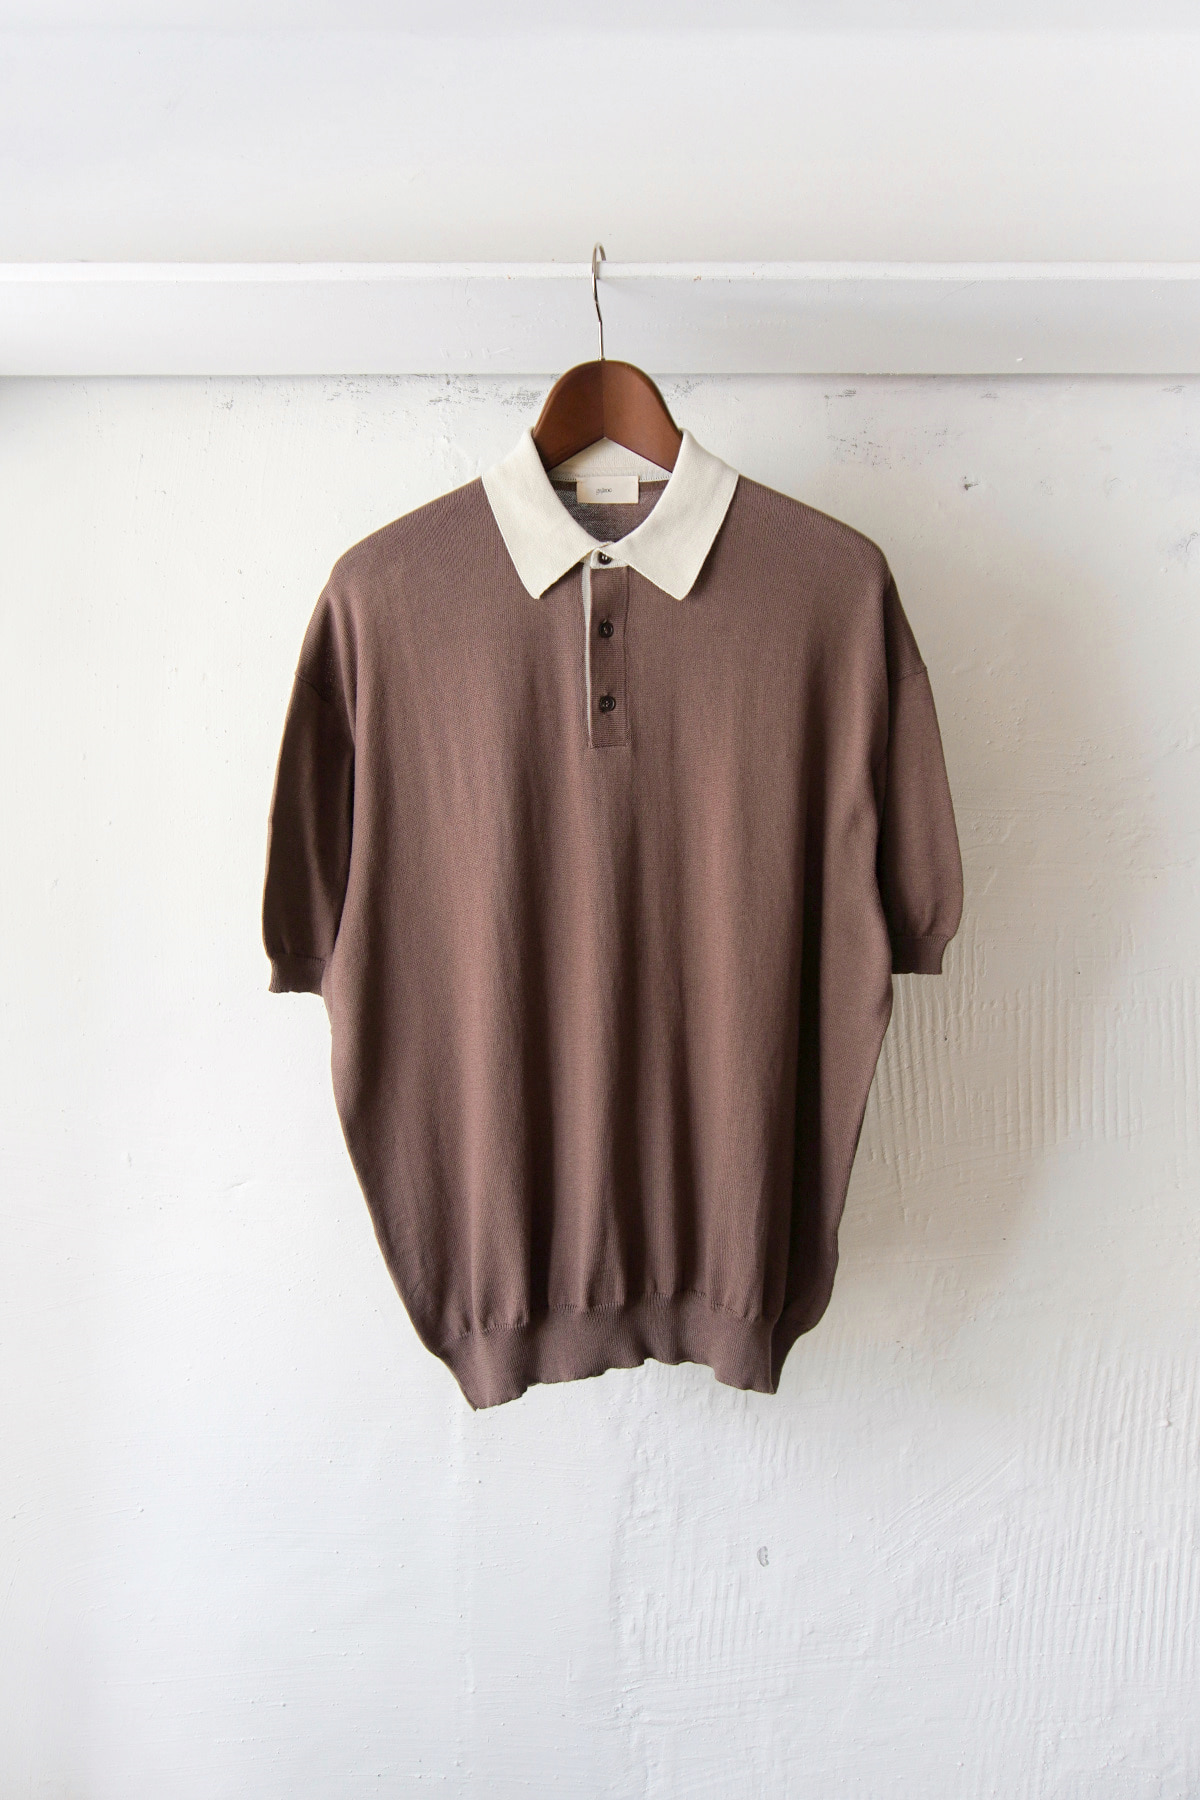 [GAJIROC] Short Sleeved Knitted Rugby Shirt - Brown